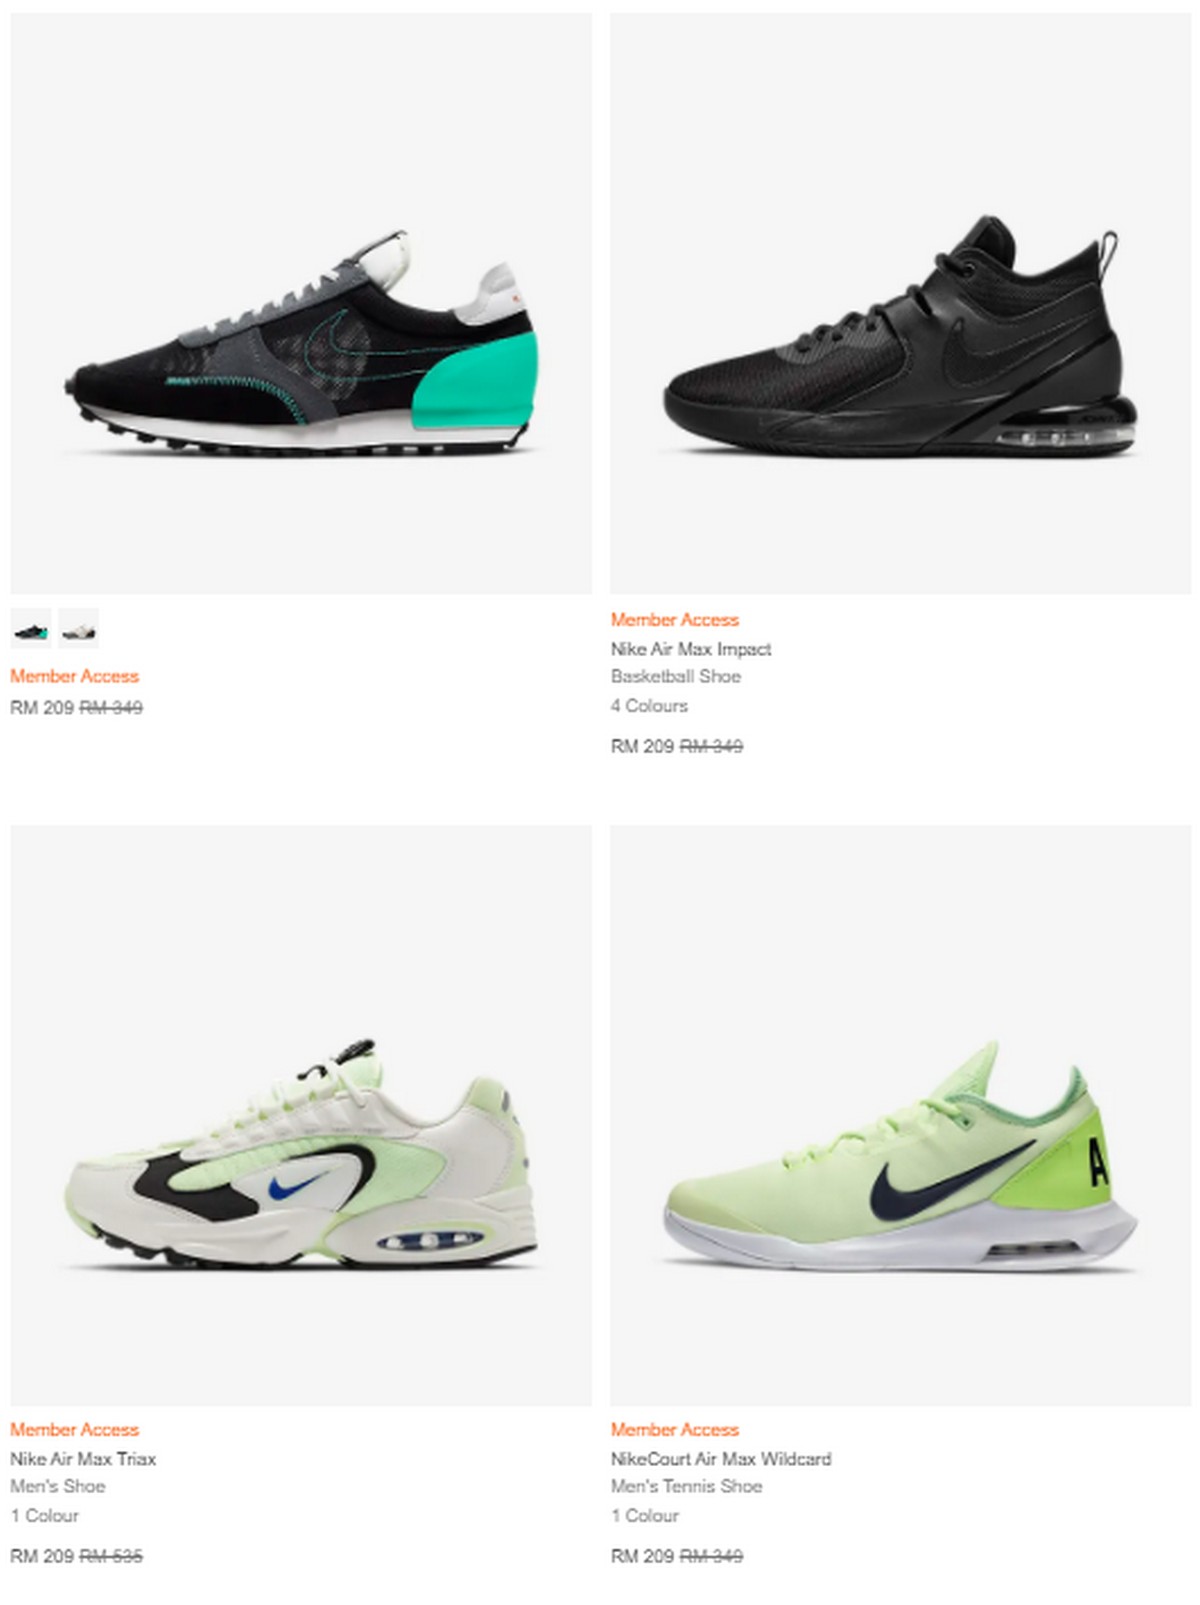 nike-11-11-preview-offer-new-6 - LifeStyle 